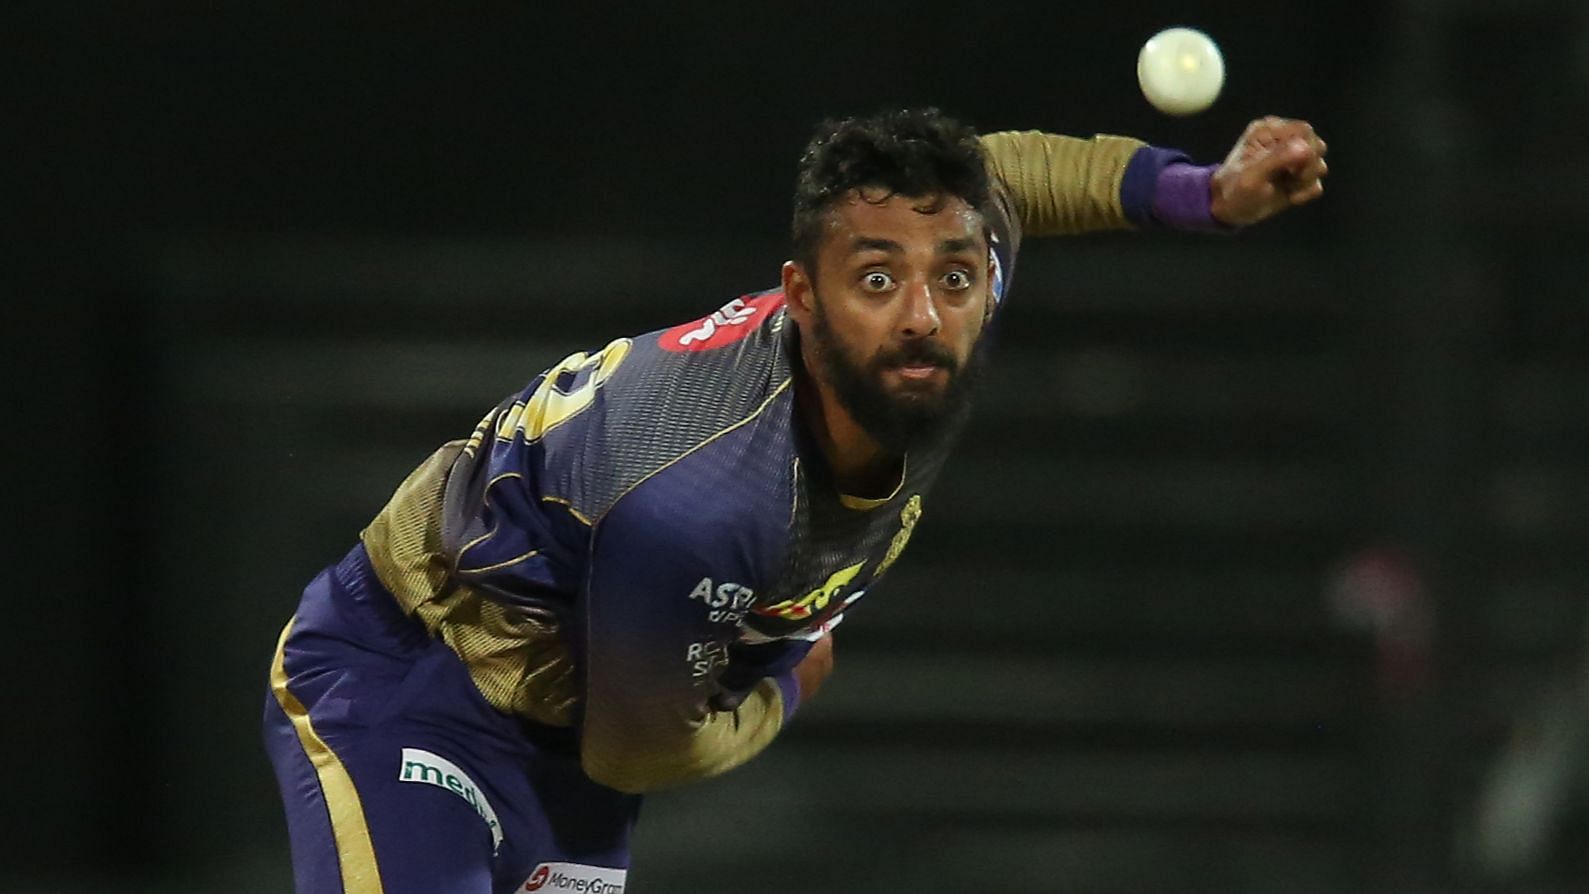 Varun Chakravarthy has been selected in India’s T20 side for the upcoming tour of Australia.